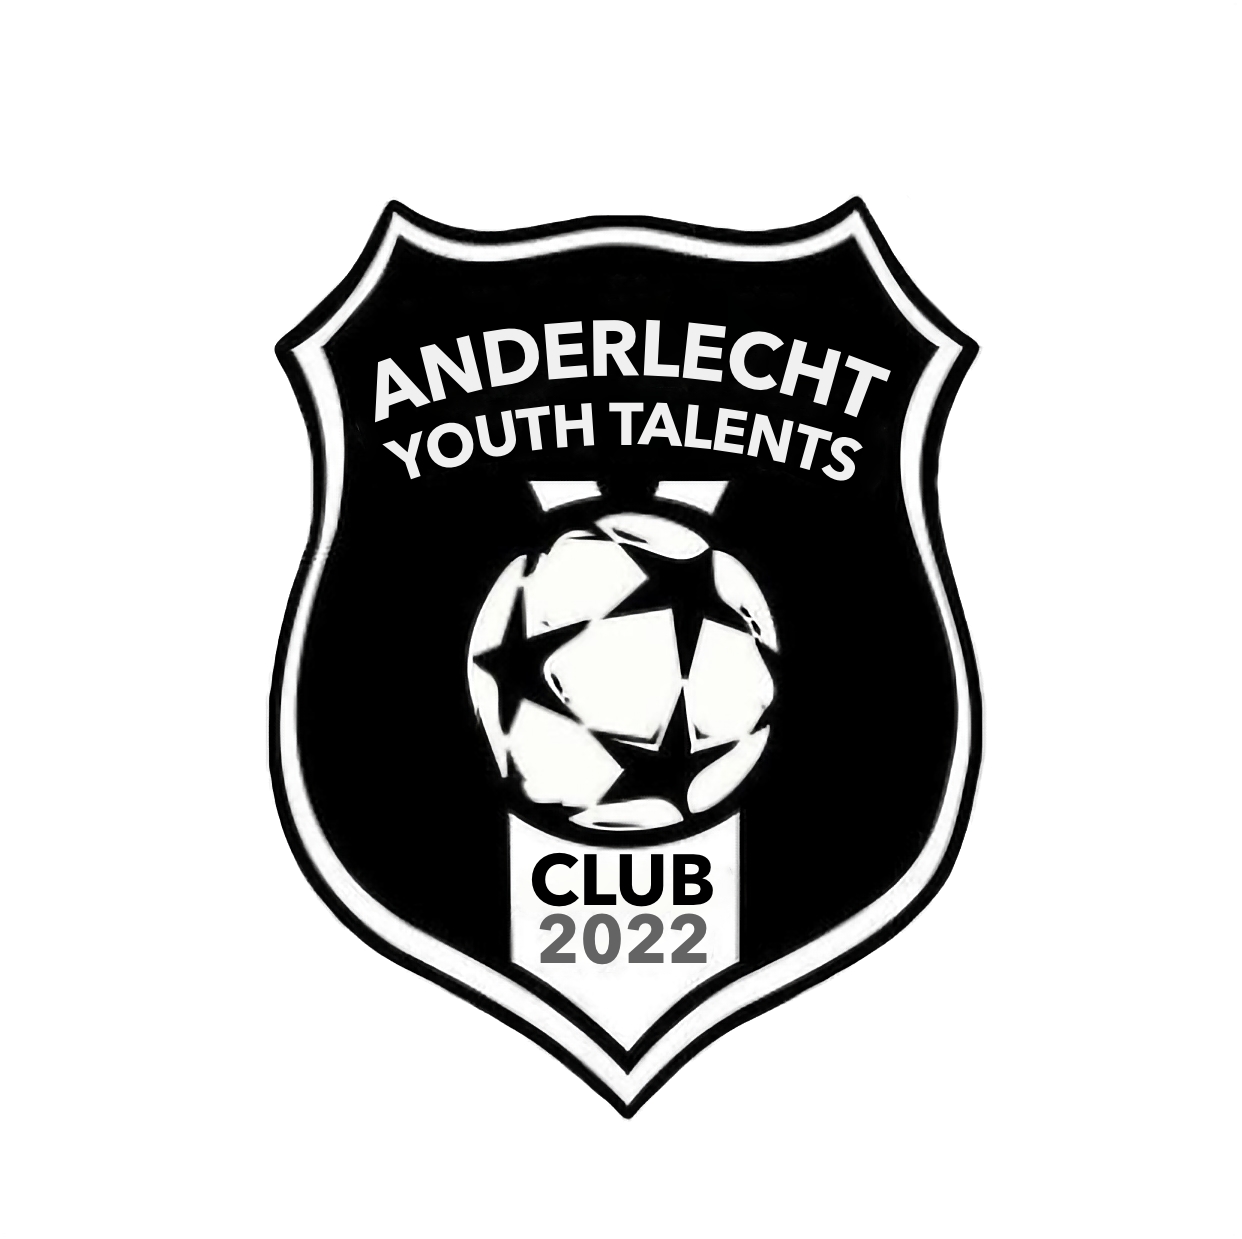 13 - Anderlecht Youth Talents